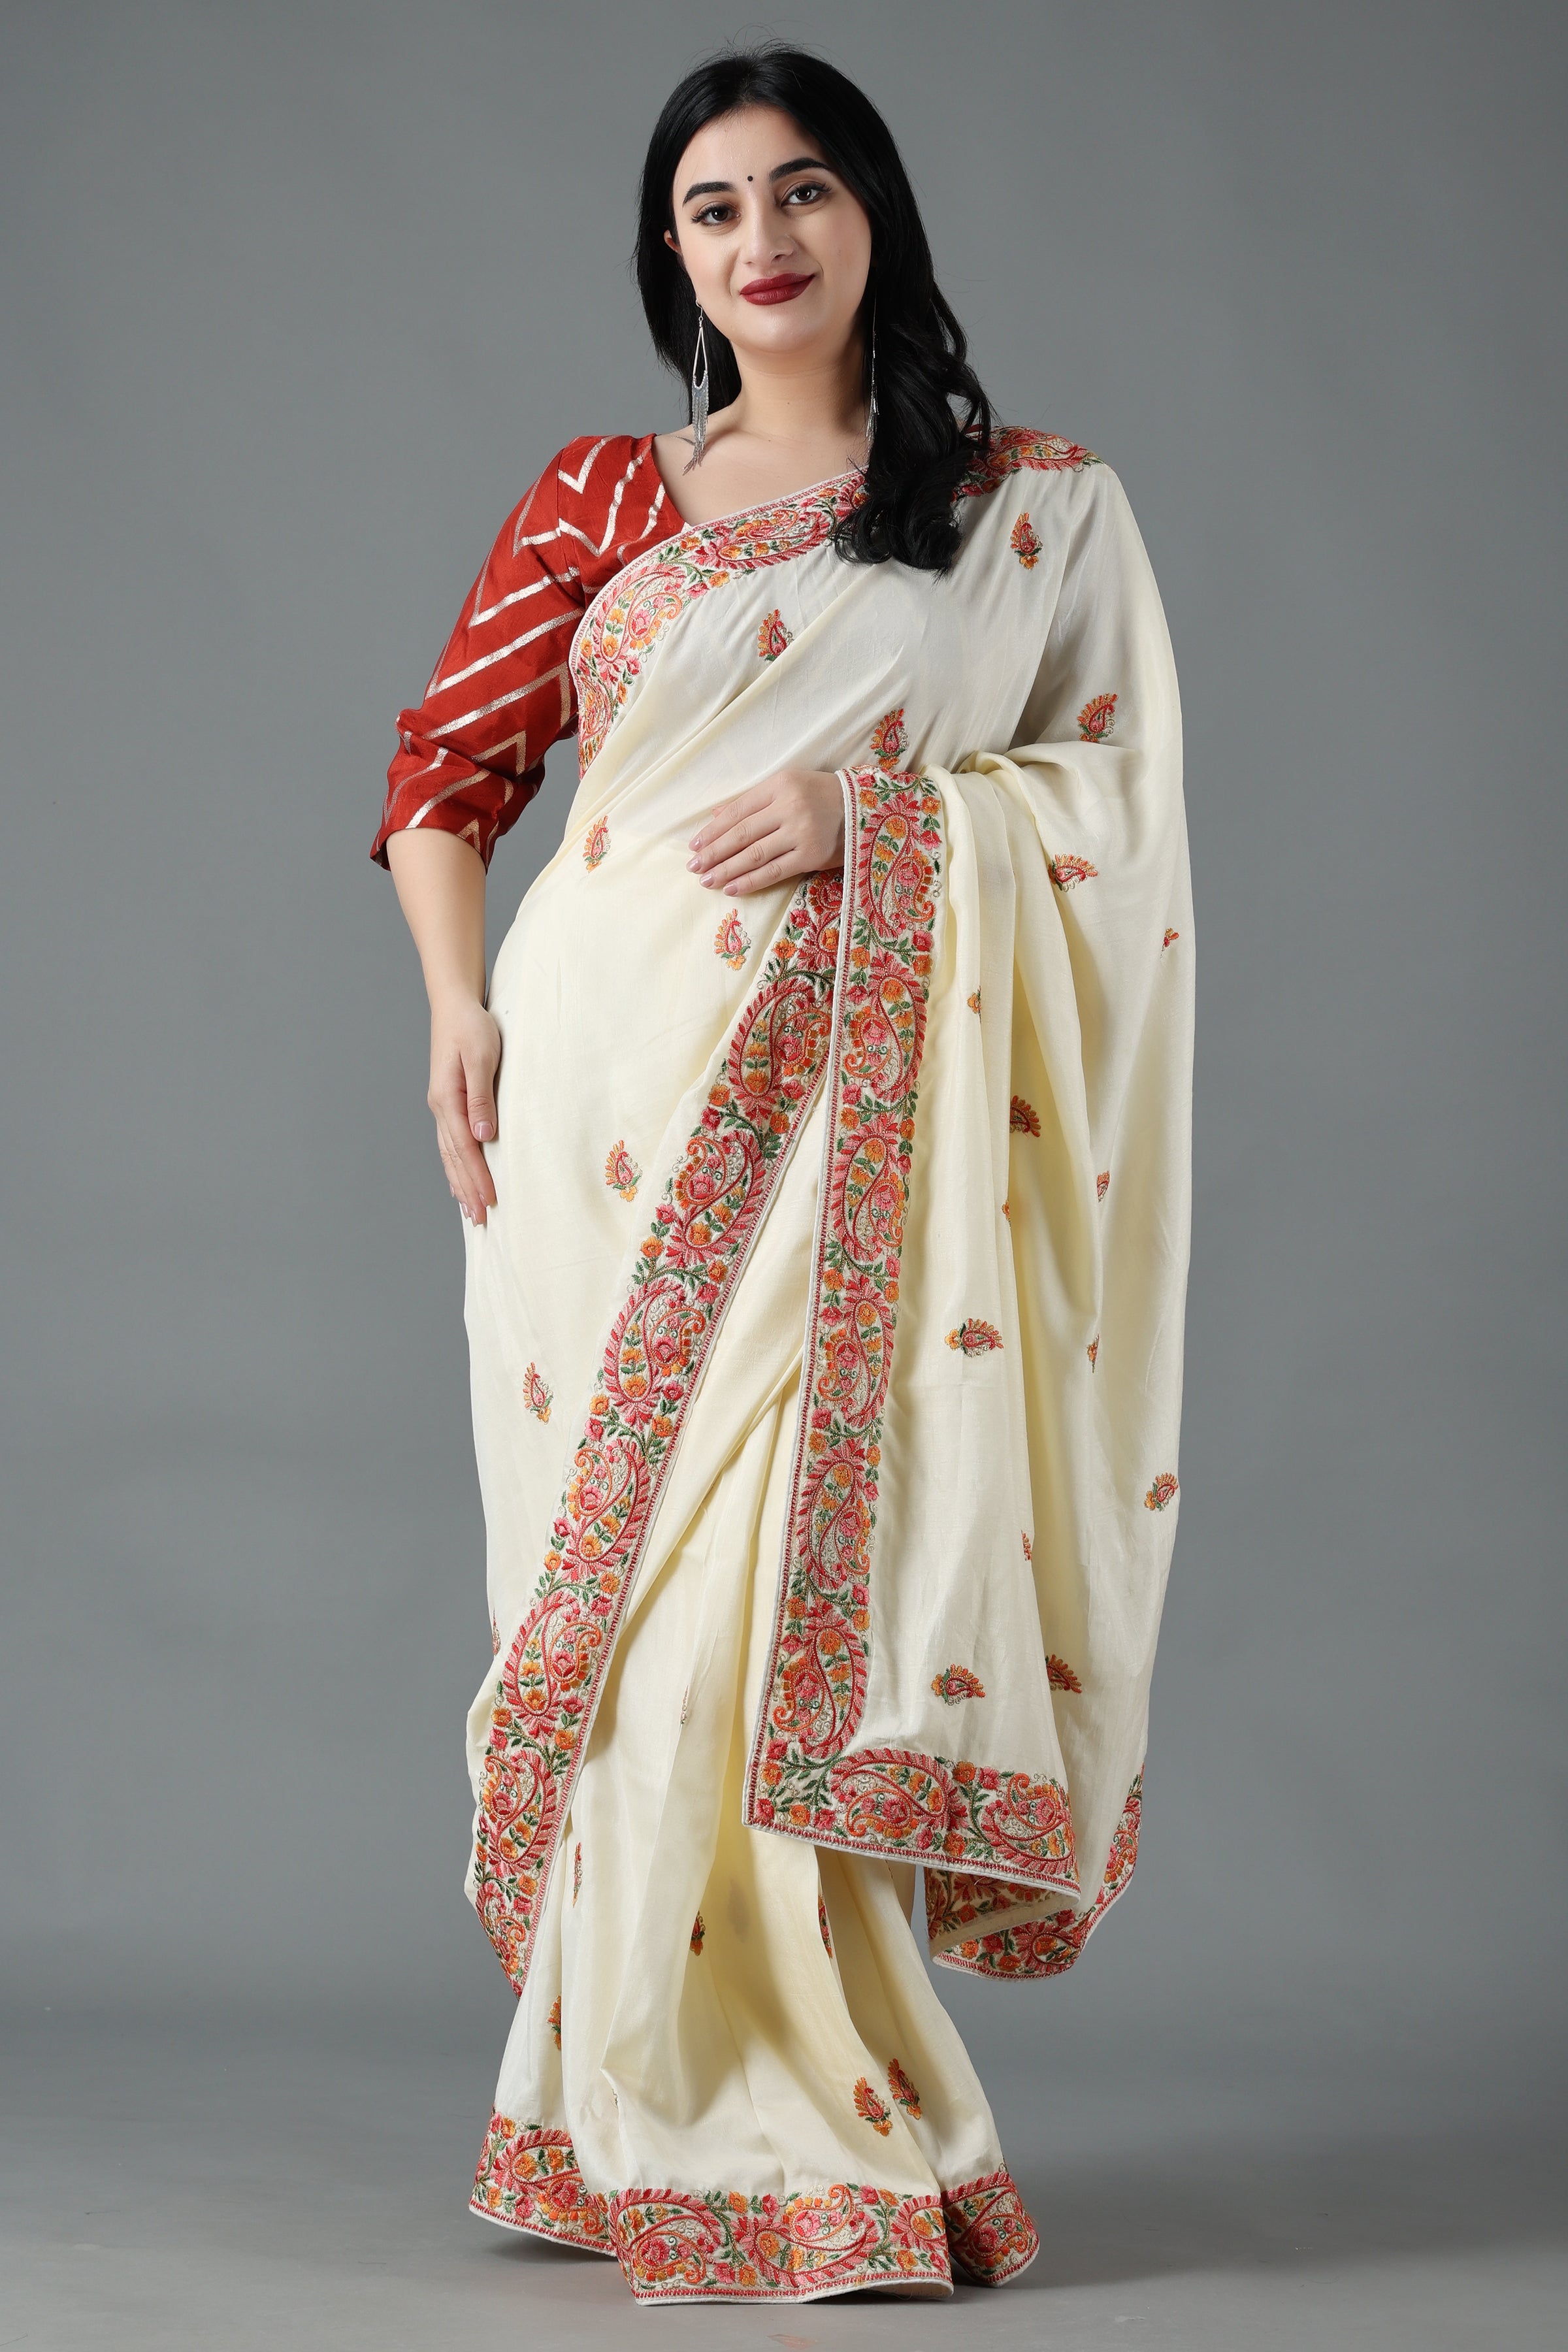 What blouse matches a white saree? - Quora